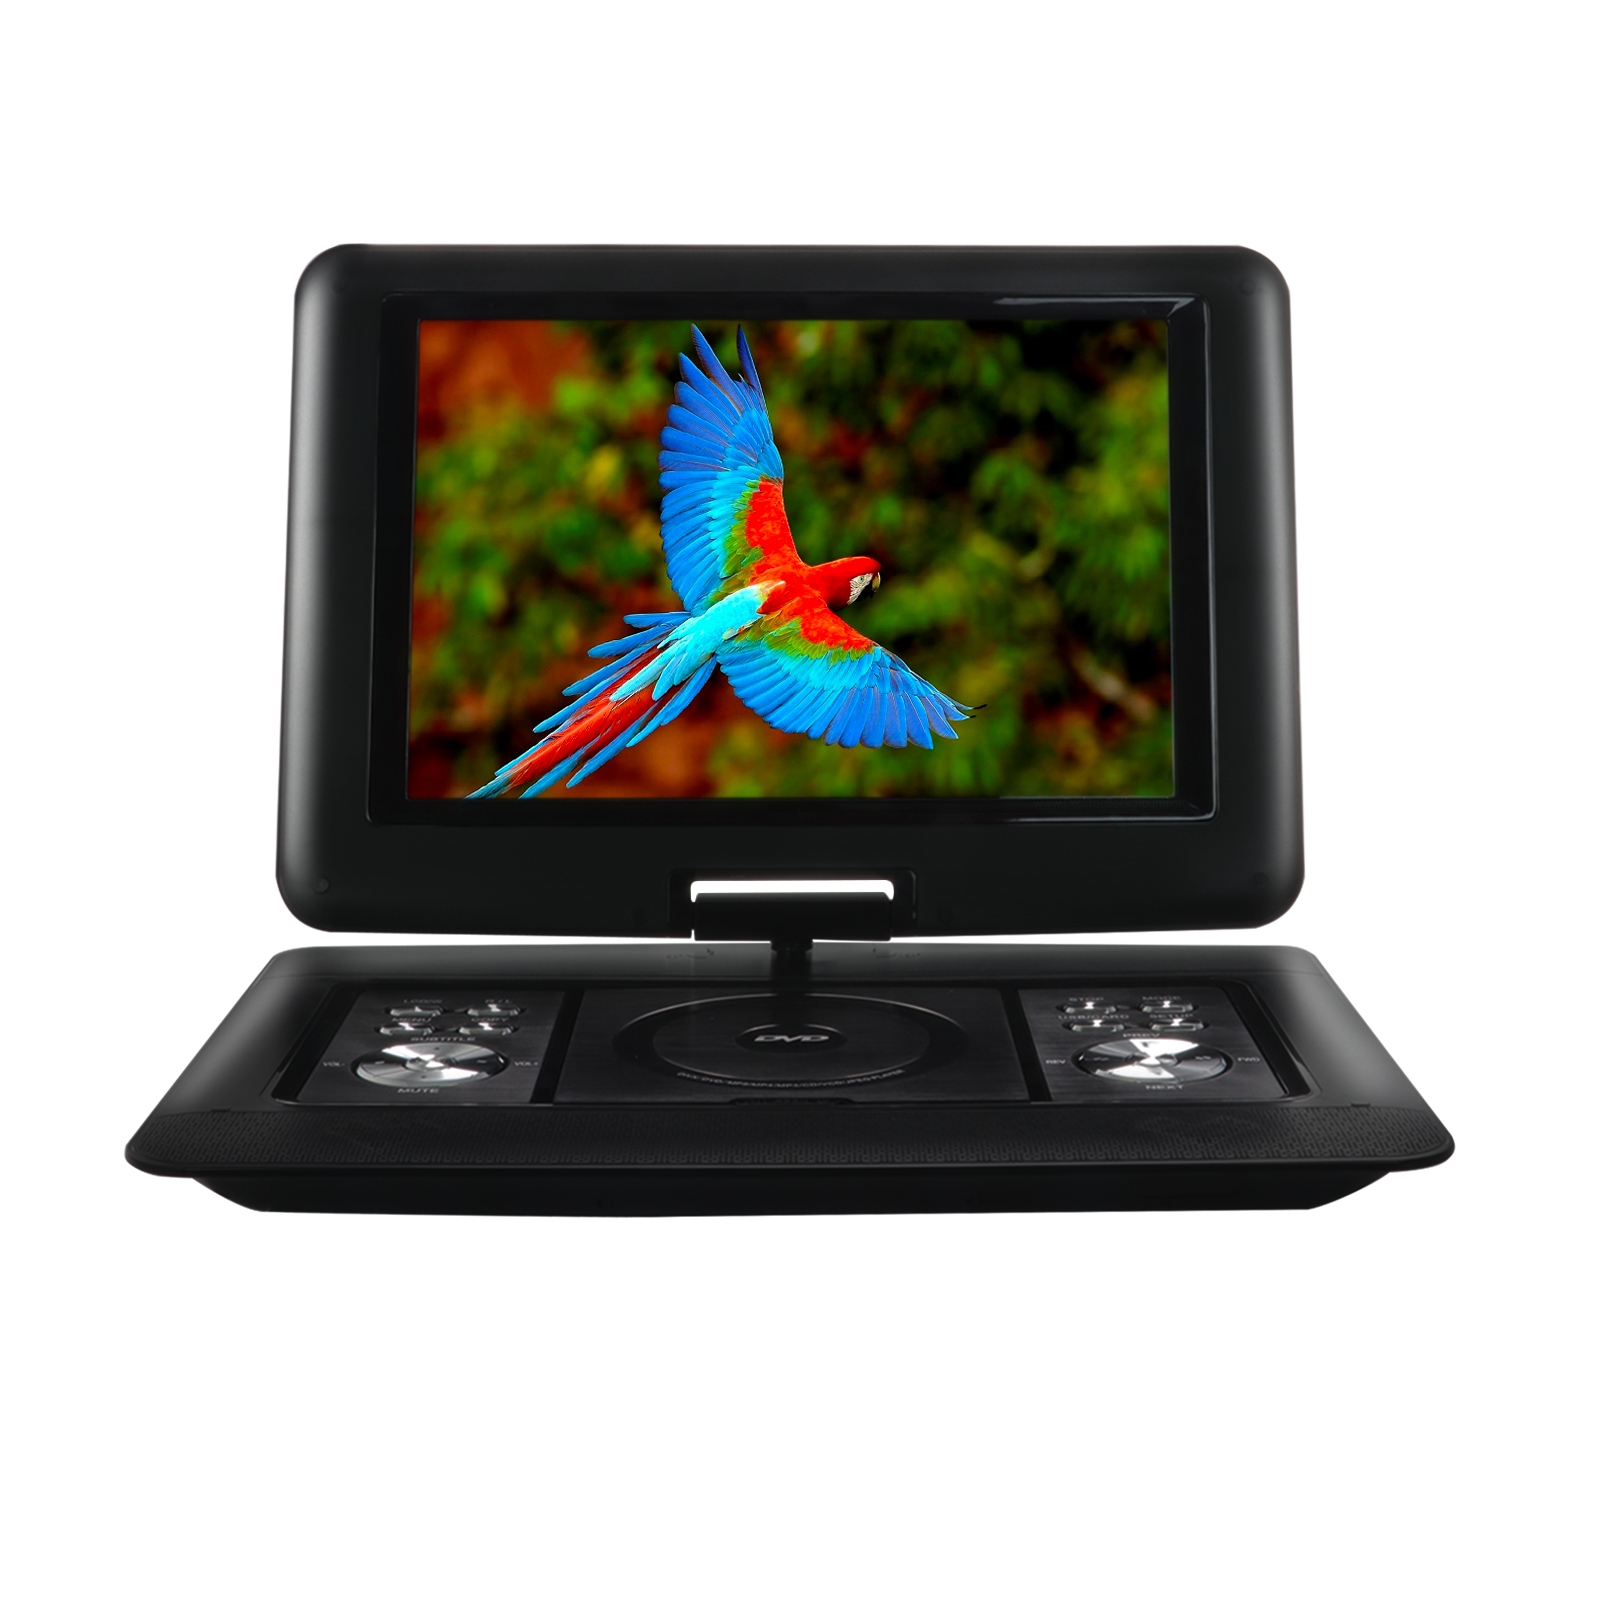 Trexonic 14.1" Portable DVD Player with TFT-LCD Screen and USB/SD/AV Inputs - image 2 of 9